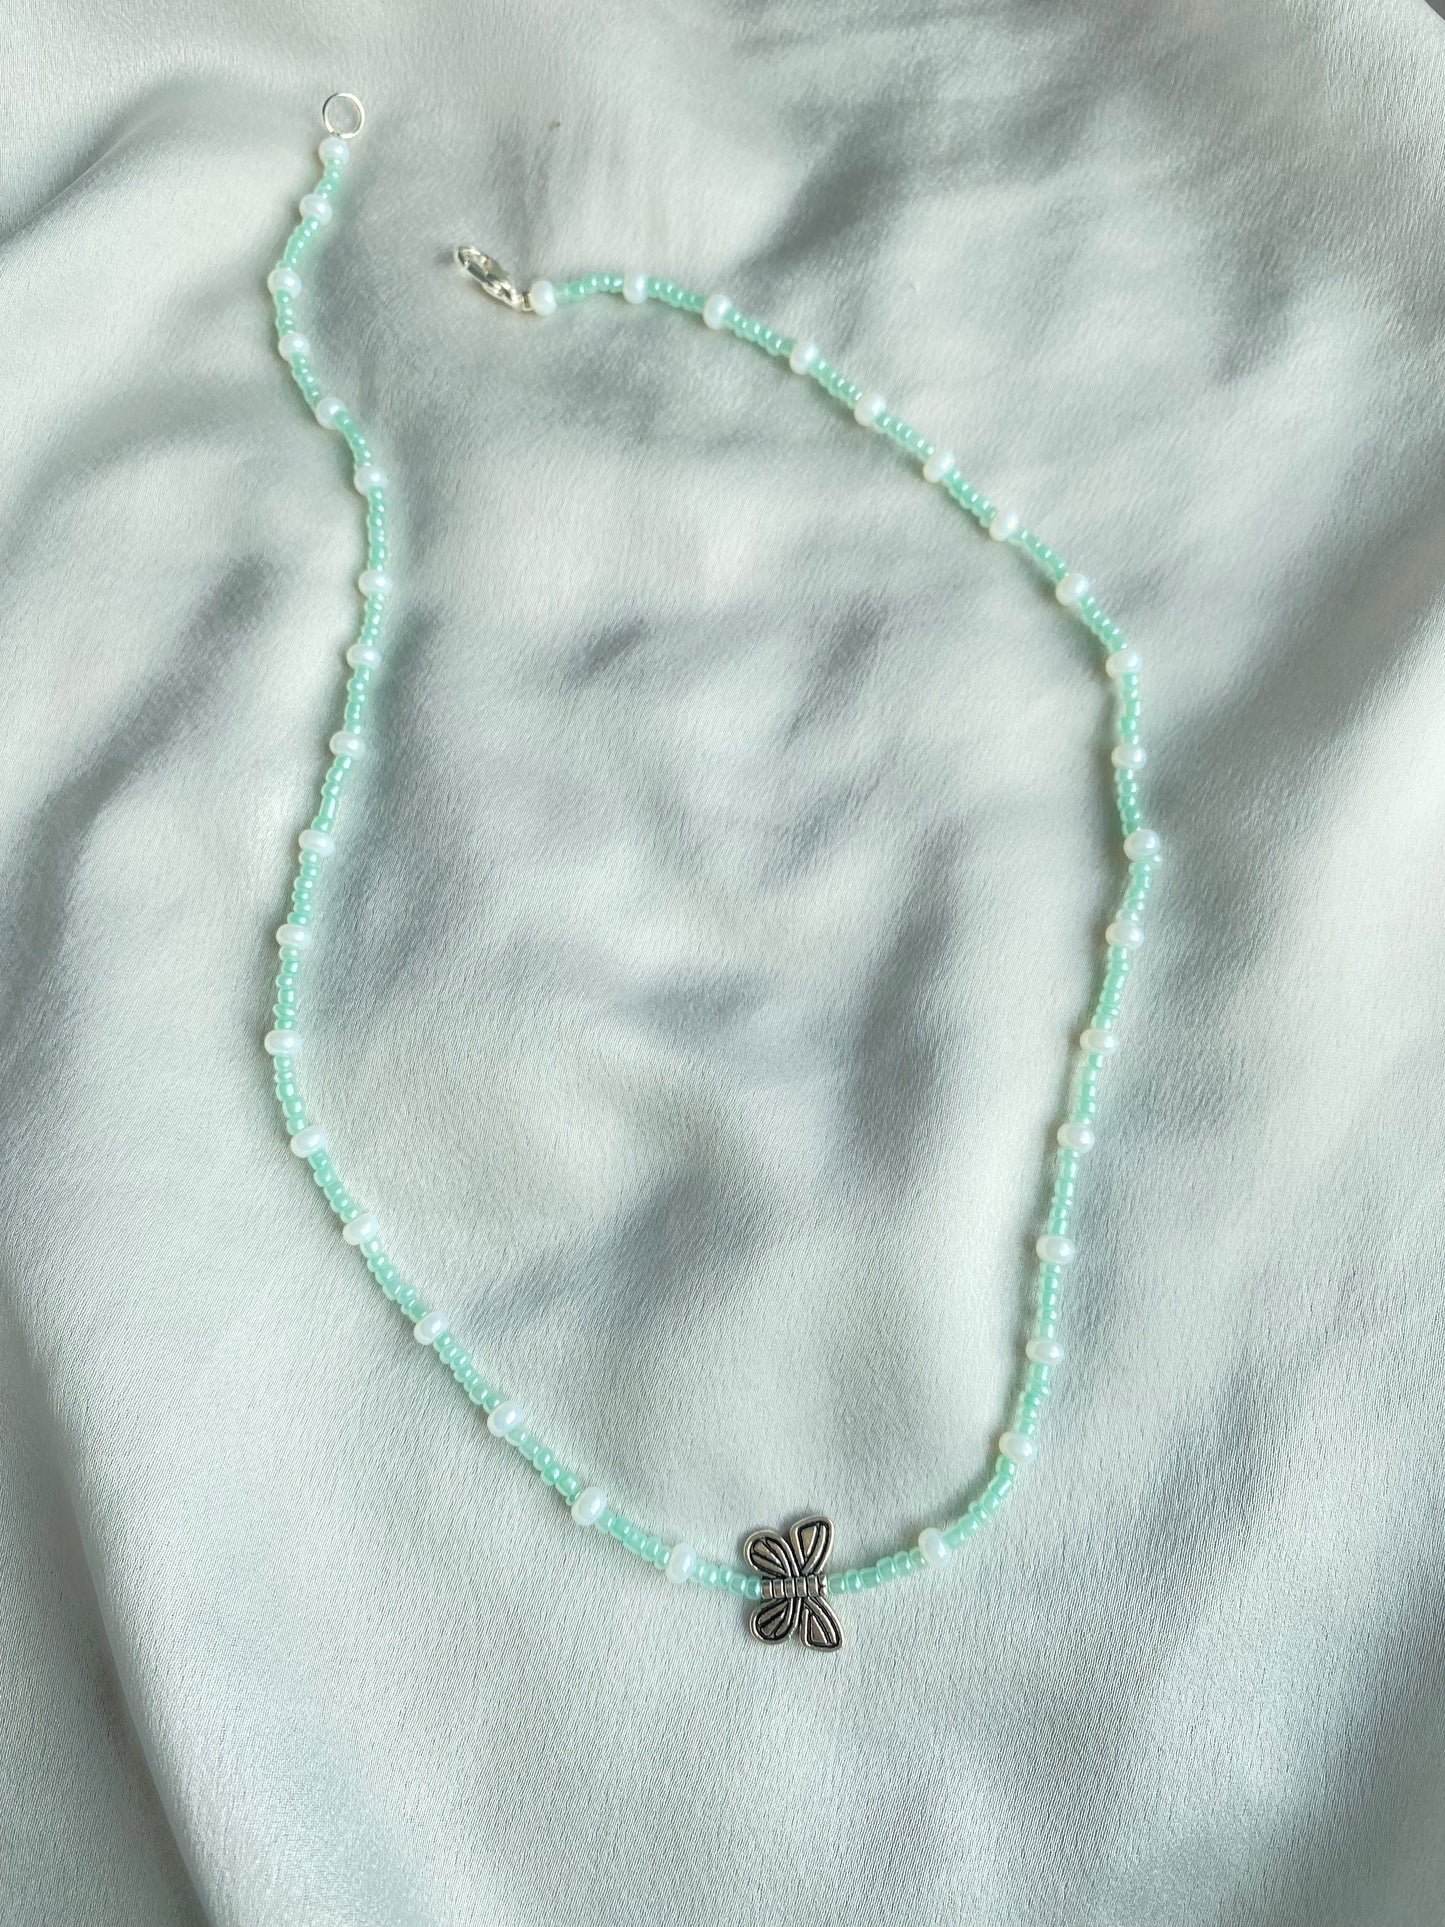 Teal butterfly necklace